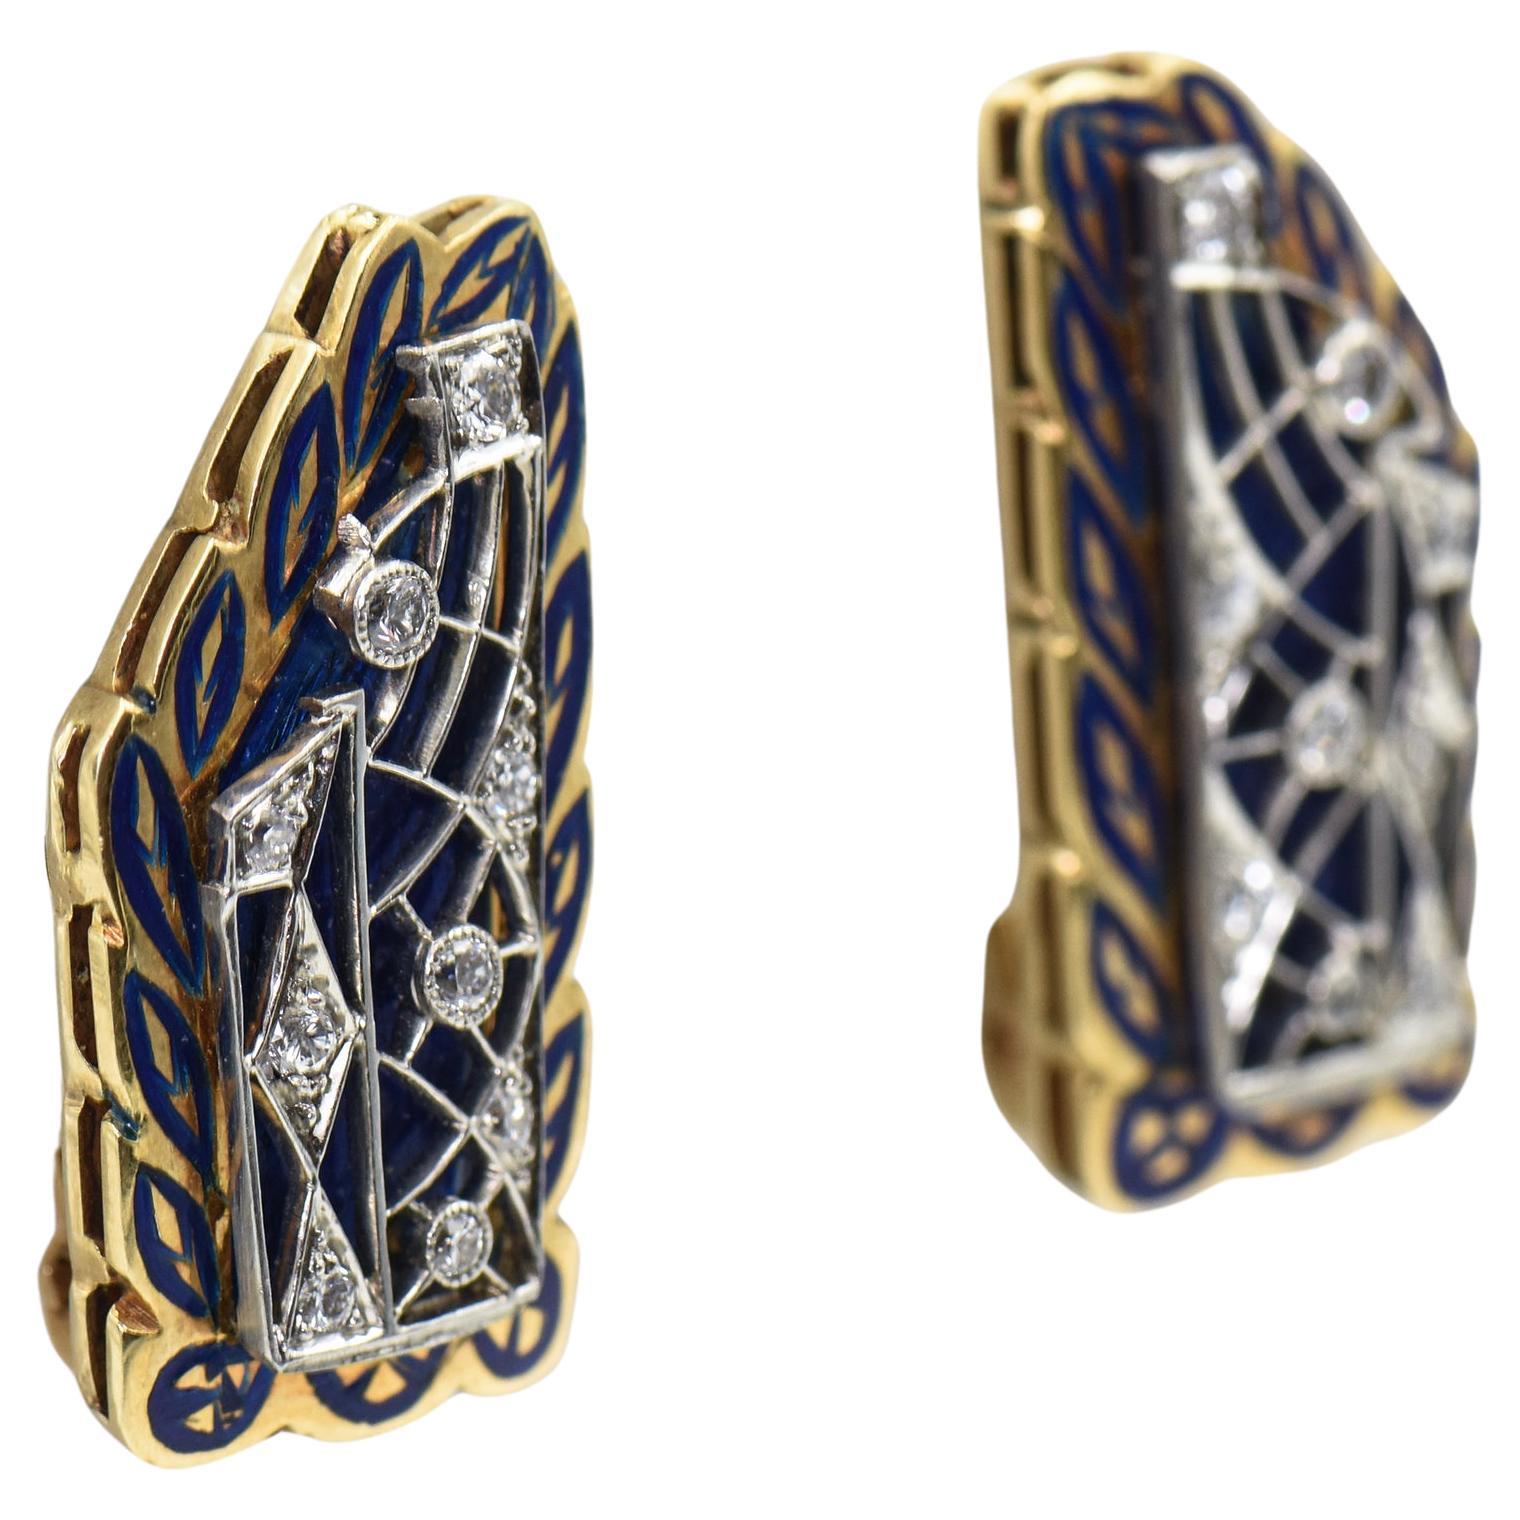 One of a kind custom made earrings that consist of a marriage made in the 1950s of a filagree art deco diamond piece mounted on a blue enamel and 14k gold earring that resembles a leaf as well as has a leaf enamel design.  They have a lever back